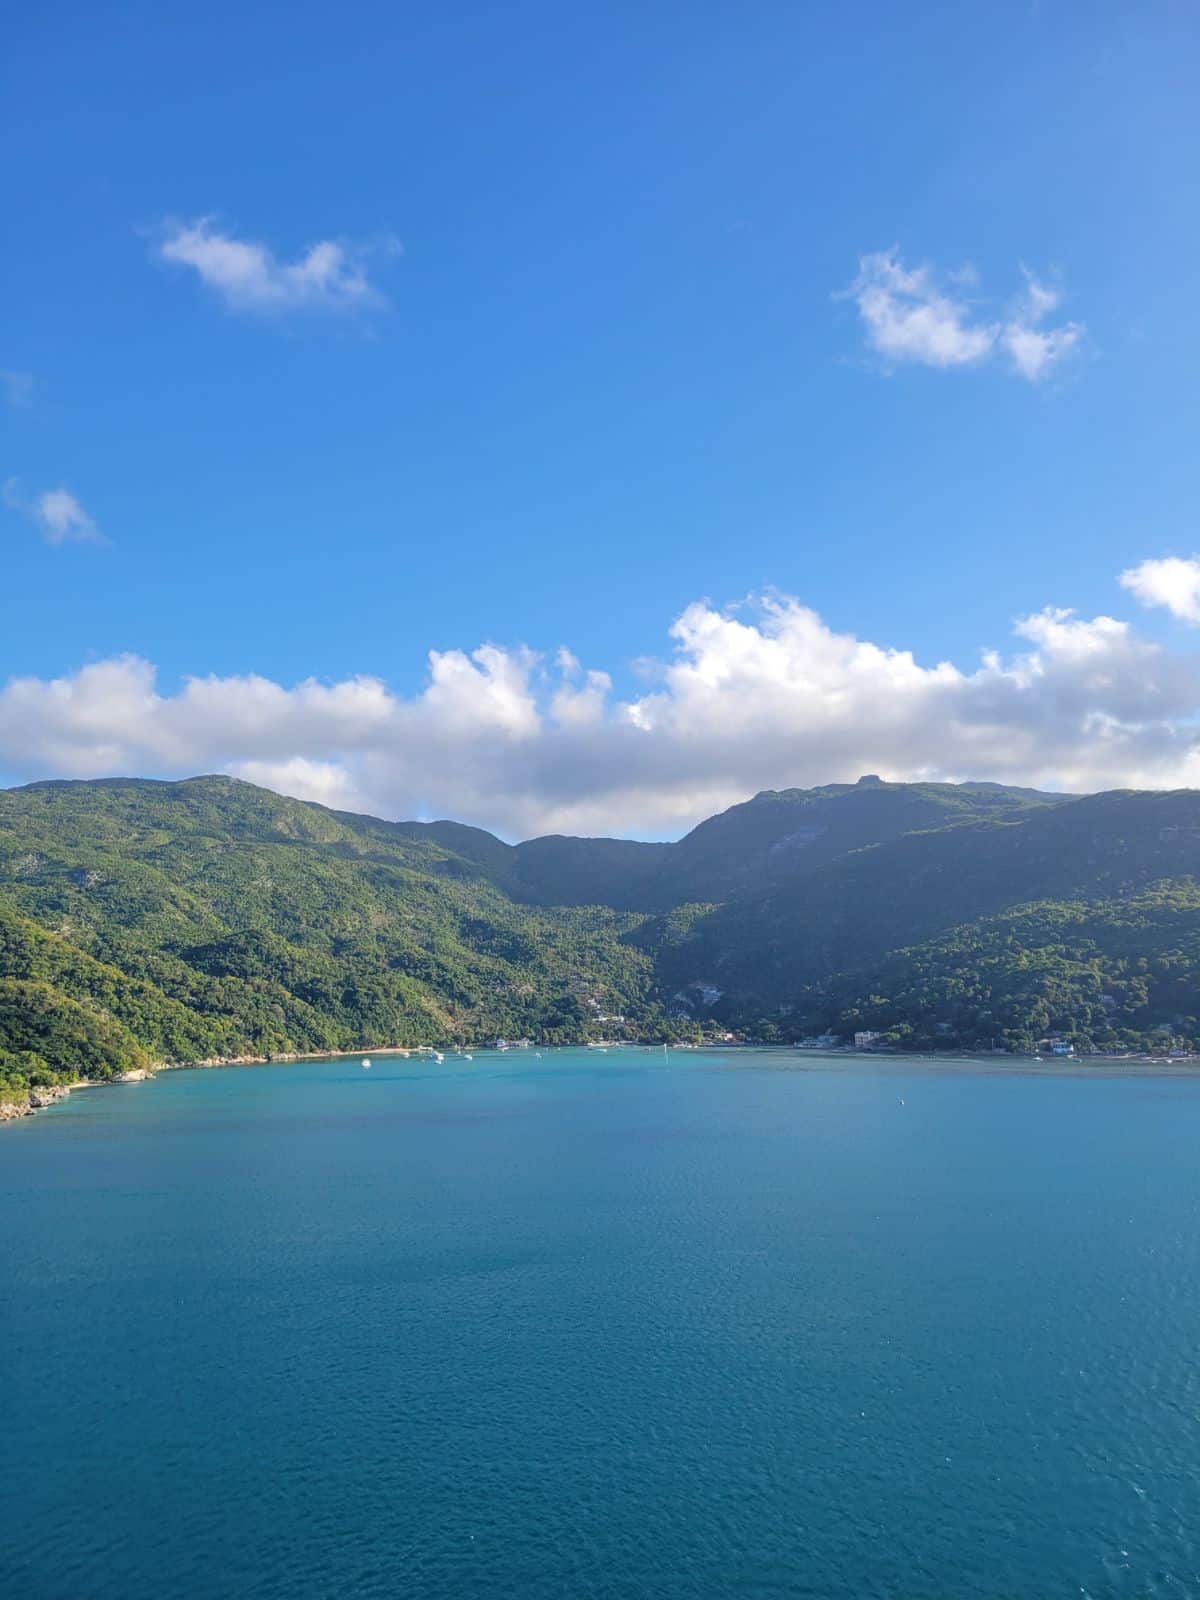 A view of Haiti as the cruise ship is leaving the port. You can see the sky, the green hills of the island the blue water below.